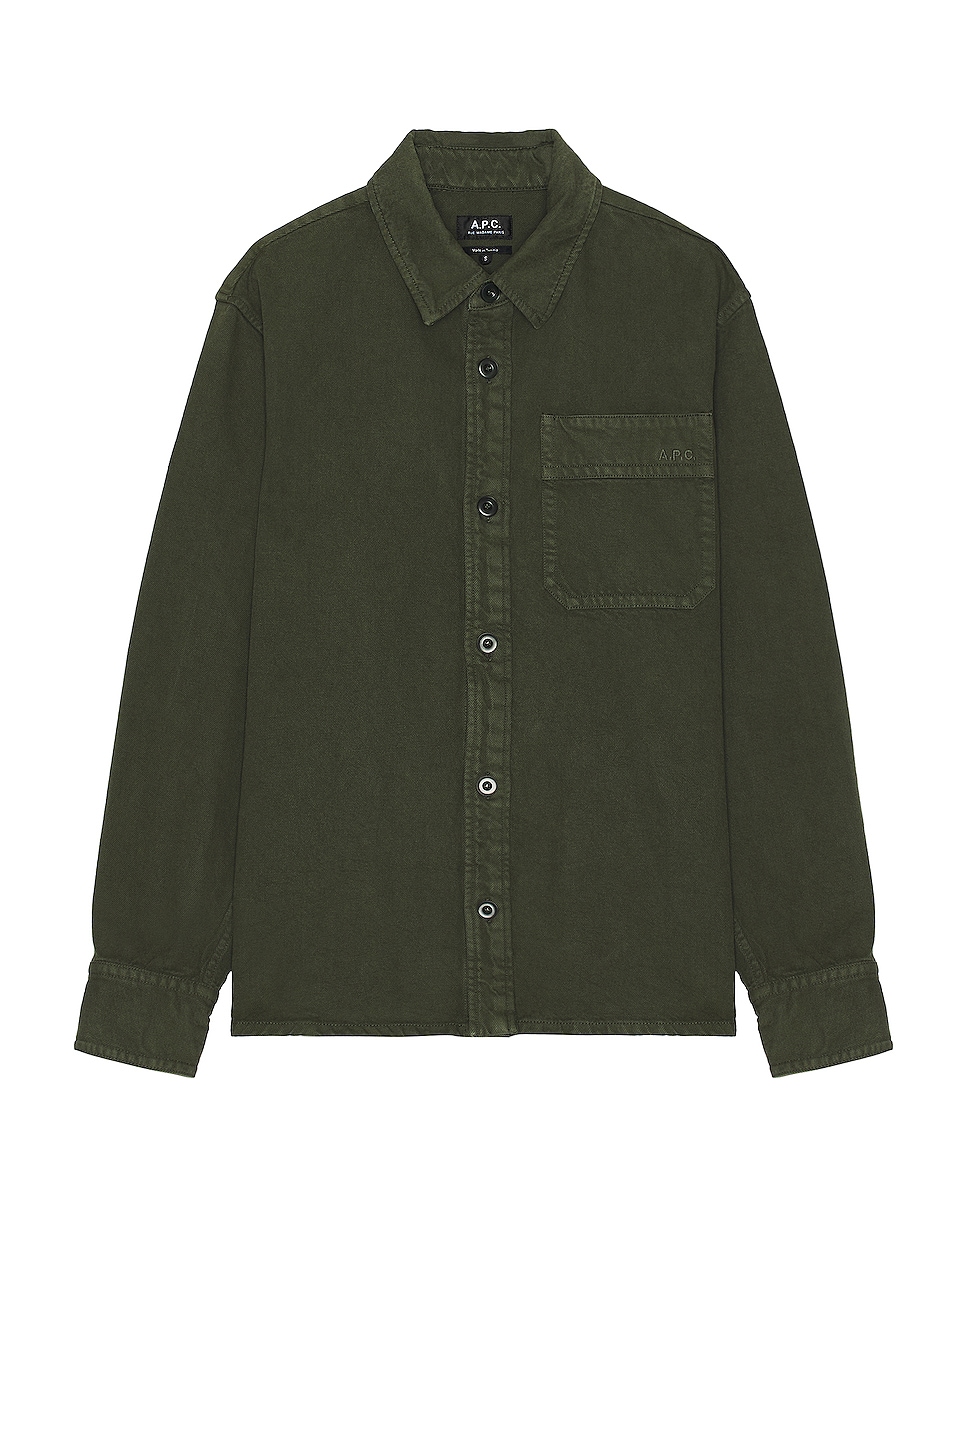 Image 1 of A.P.C. Basile Brodee Poitrine Shirt in Green